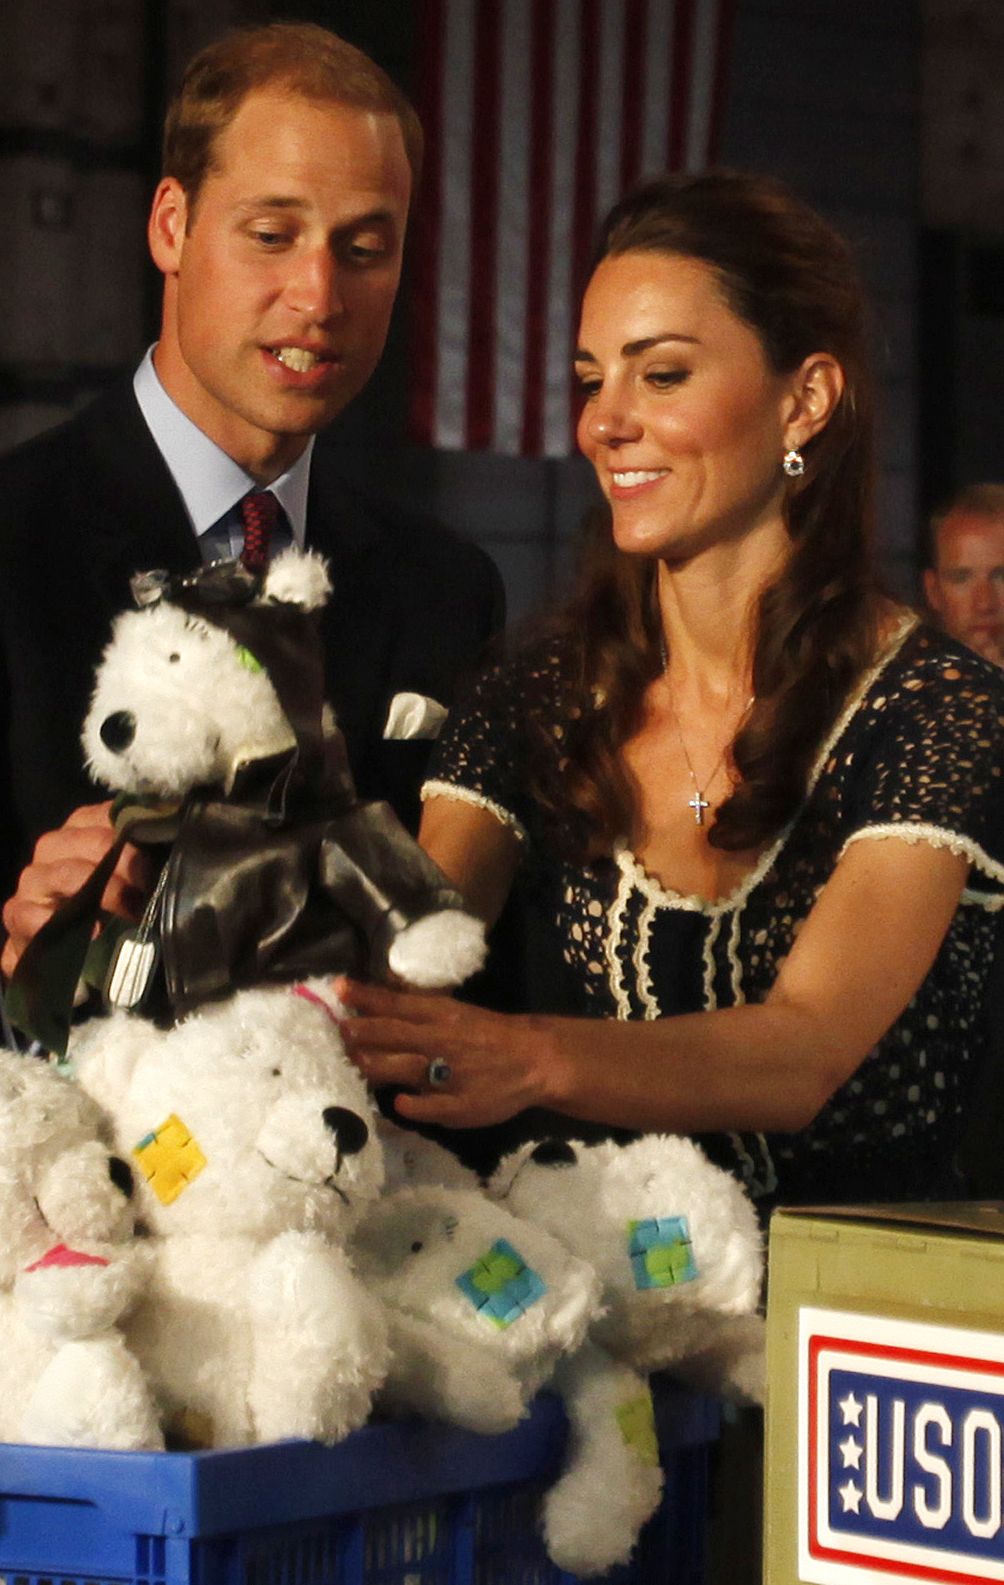 Prince William and his wife, Kate, the Duke and Duchess of Cambridge, look at a stuffed bear destined for children of military families during their July visit to California.